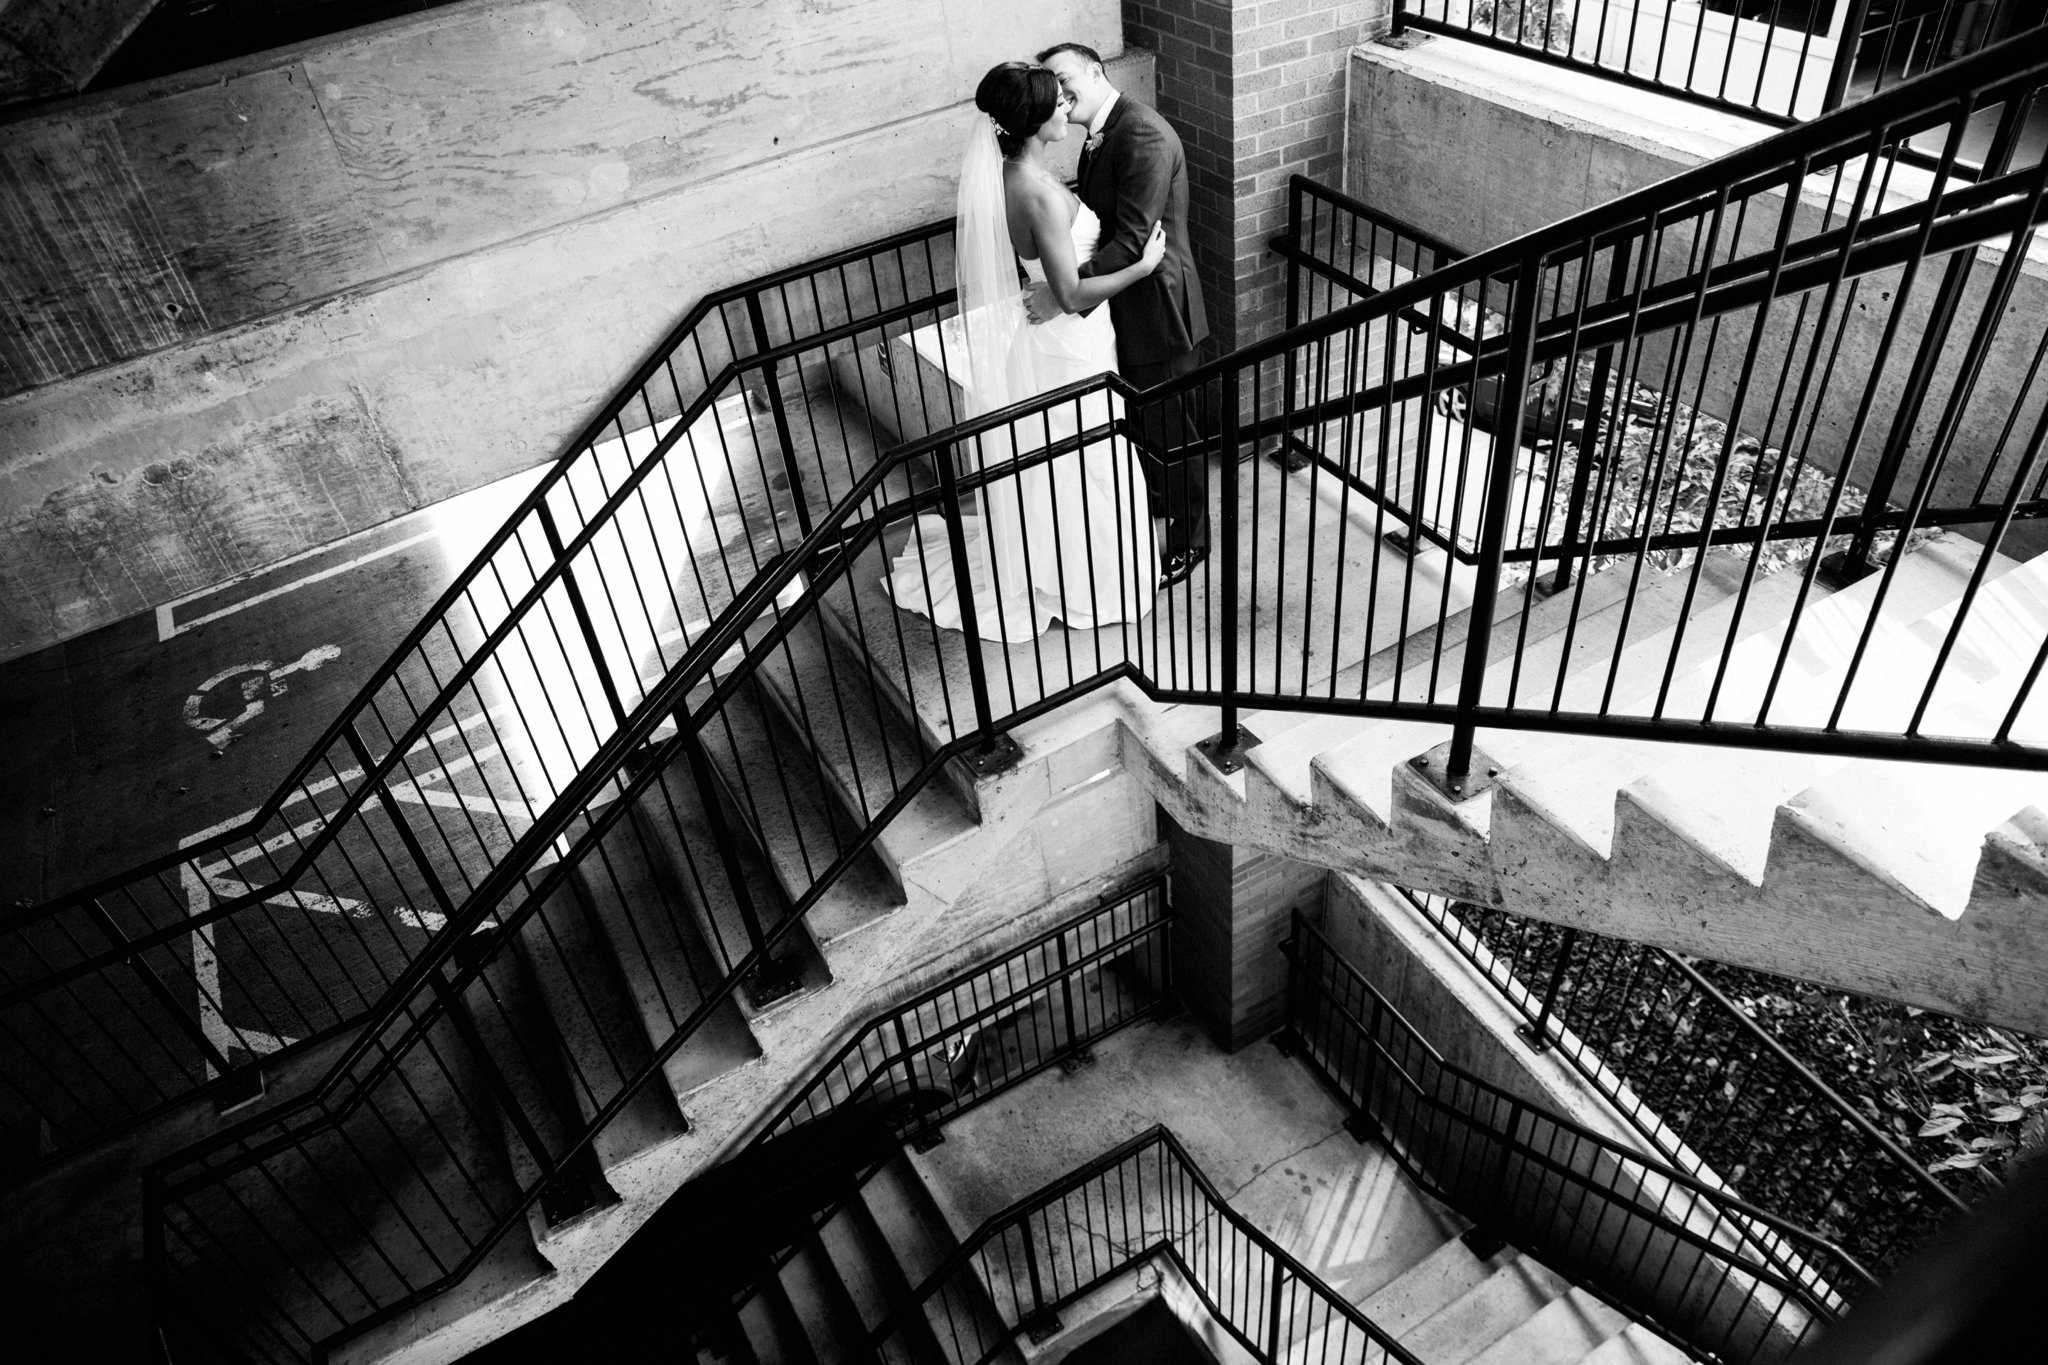 black and white | wedding | wedding photos | wedding photography | images by feliciathephotographer.com | Country Club Plaza | Kansas City | Unity Temple | first look | bride and groom | staircase meeting | groom reaction | embrace | kisses 